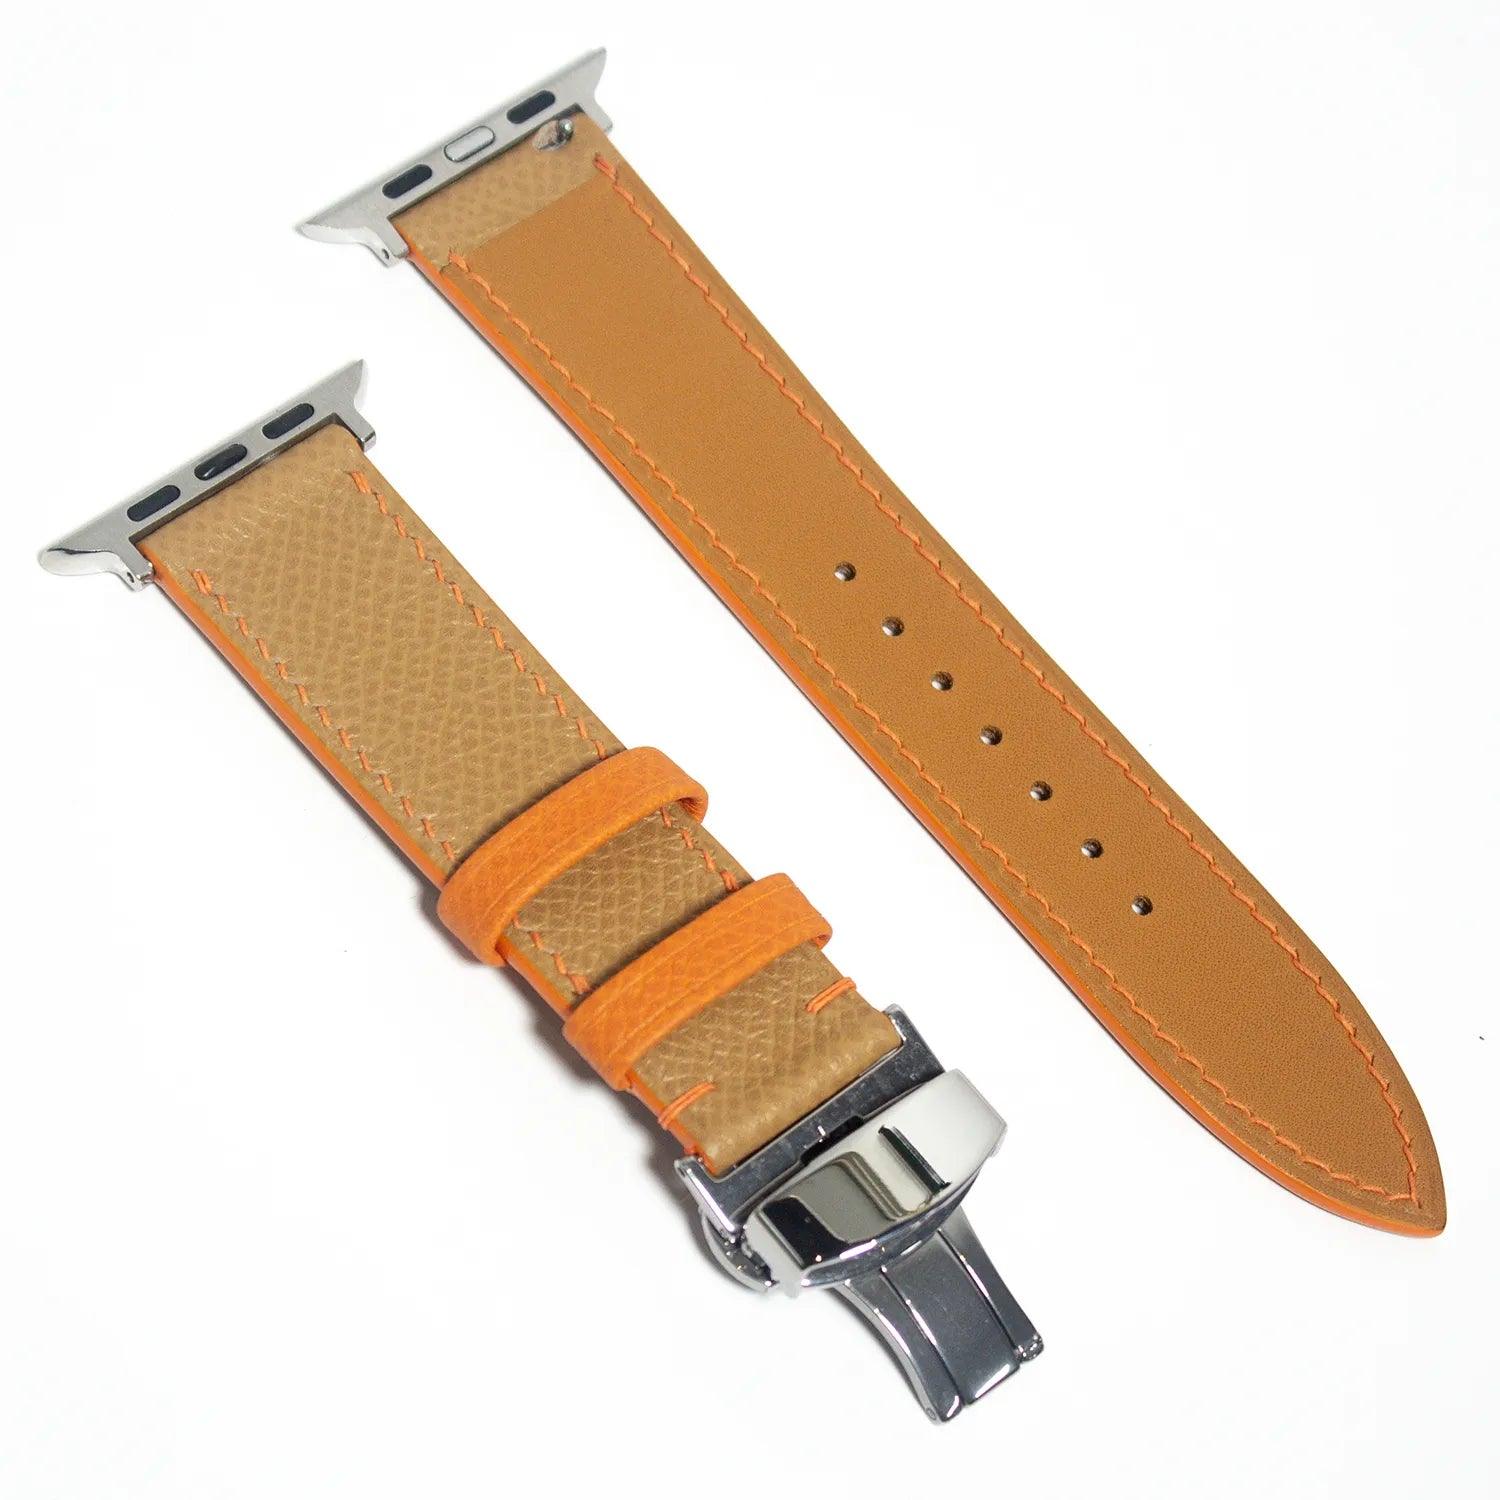 Chic leather watch bands made from beige Epsom leather, designed to add a touch of elegance to any Apple Watch.